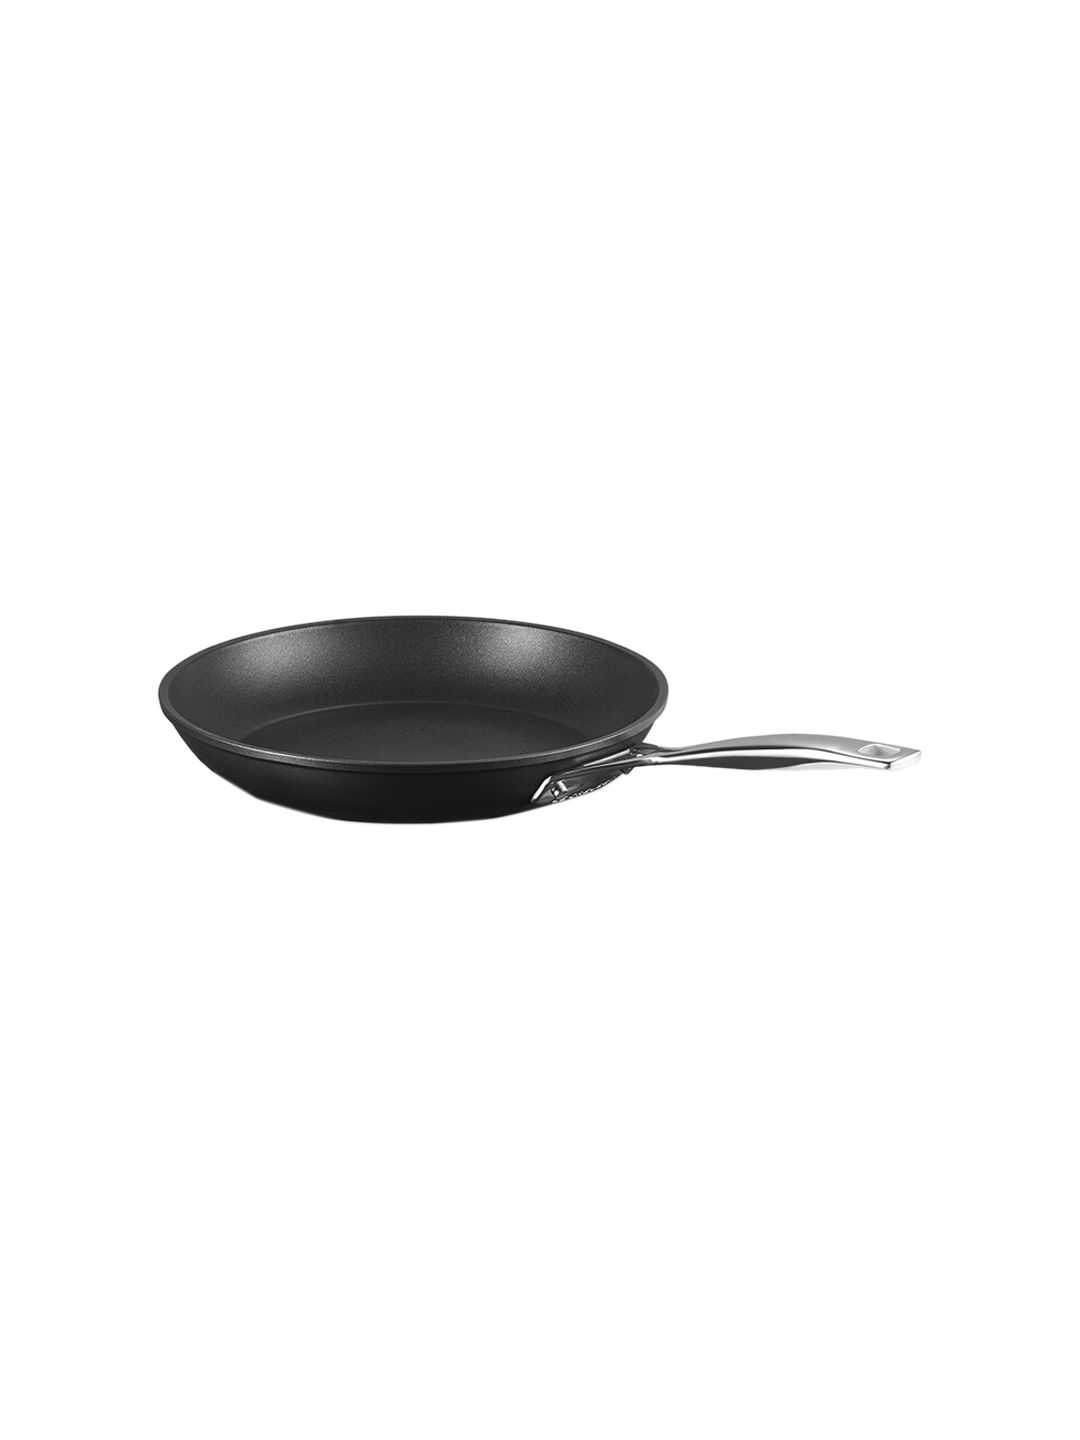 LE CREUSET Unisex Black Solid Frying Pan Price in India